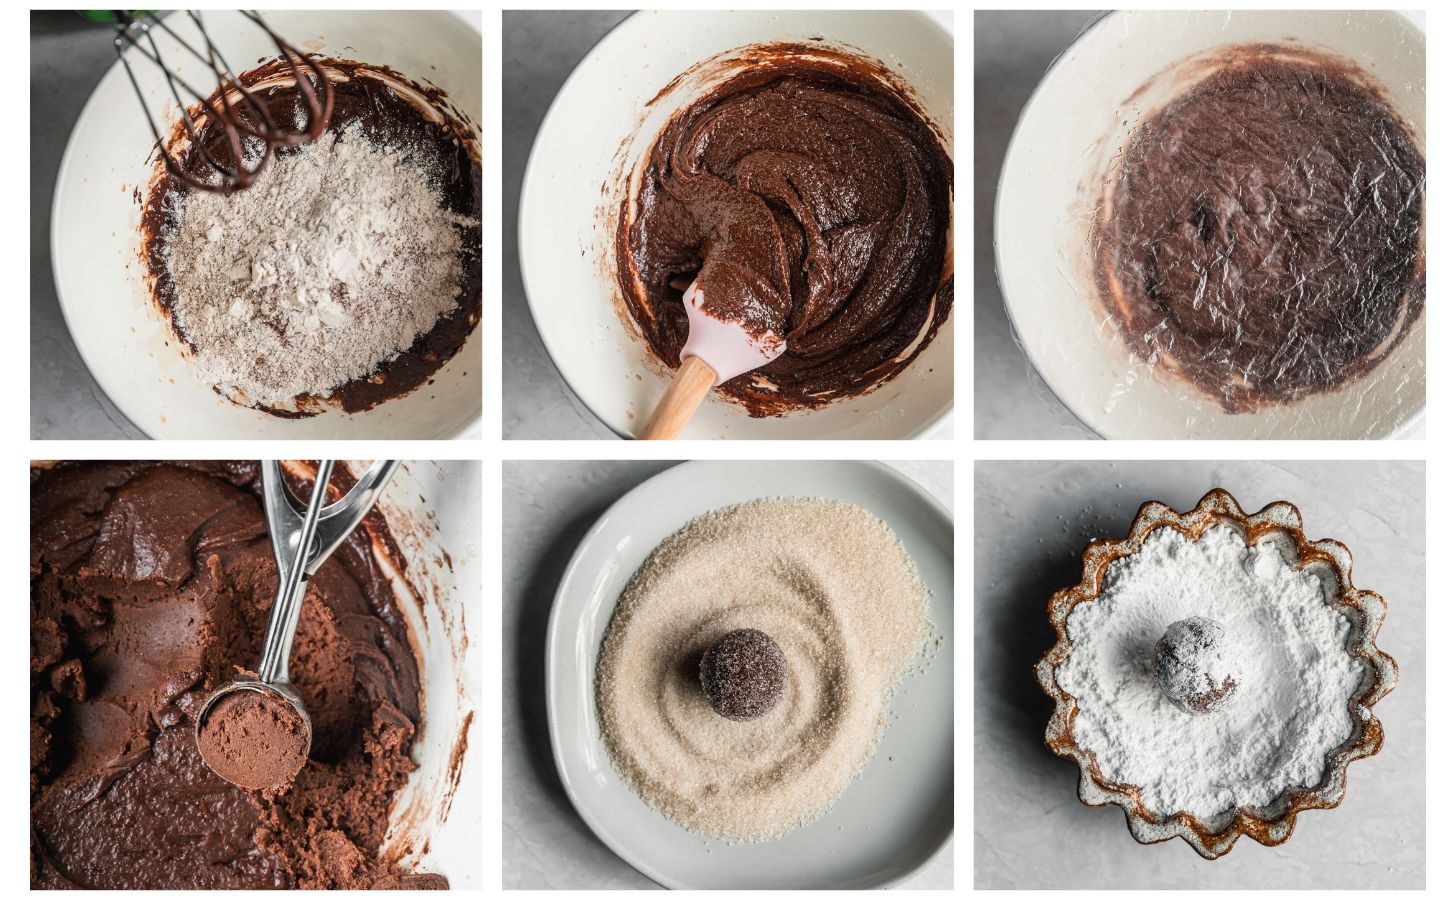 Six steps to making espresso chocolate cookies. In photo 1, a white bowl of chocolate cookie batter is topped with flour. In photo 2, the dough is mixed. In photo 3, the bowl is covered with a bowl cover. In photo 4, the dough is being scooped. In photo 5, a ball of dough is being rolled in a white plate of granulated sugar. In photo 6, the dough ball is being rolled in a brown bowl of powdered sugar.